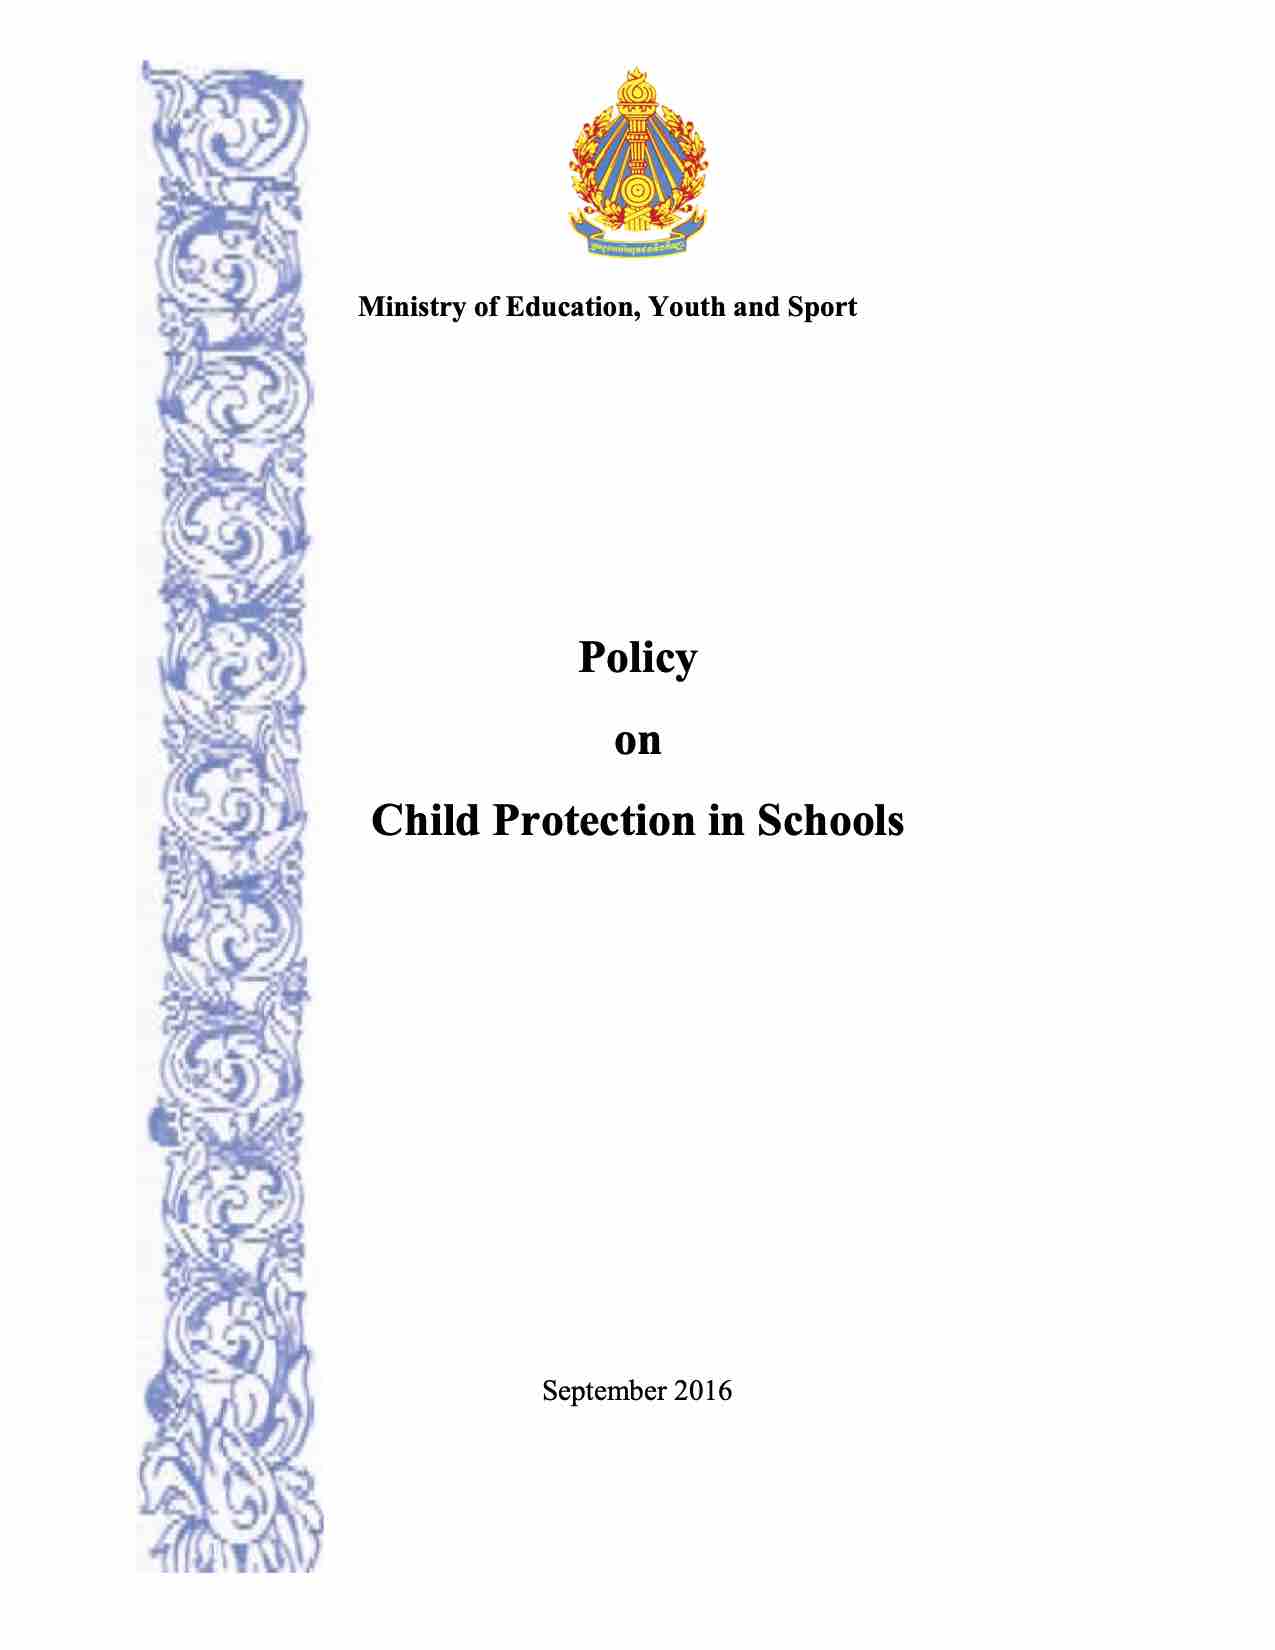 https://strongfamily.mosvy.gov.kh/wp-content/uploads/2019/10/Ministry-of-Education-Youth-and-Sports-Child-Protection-Policy-in-Schools-Copy.jpg